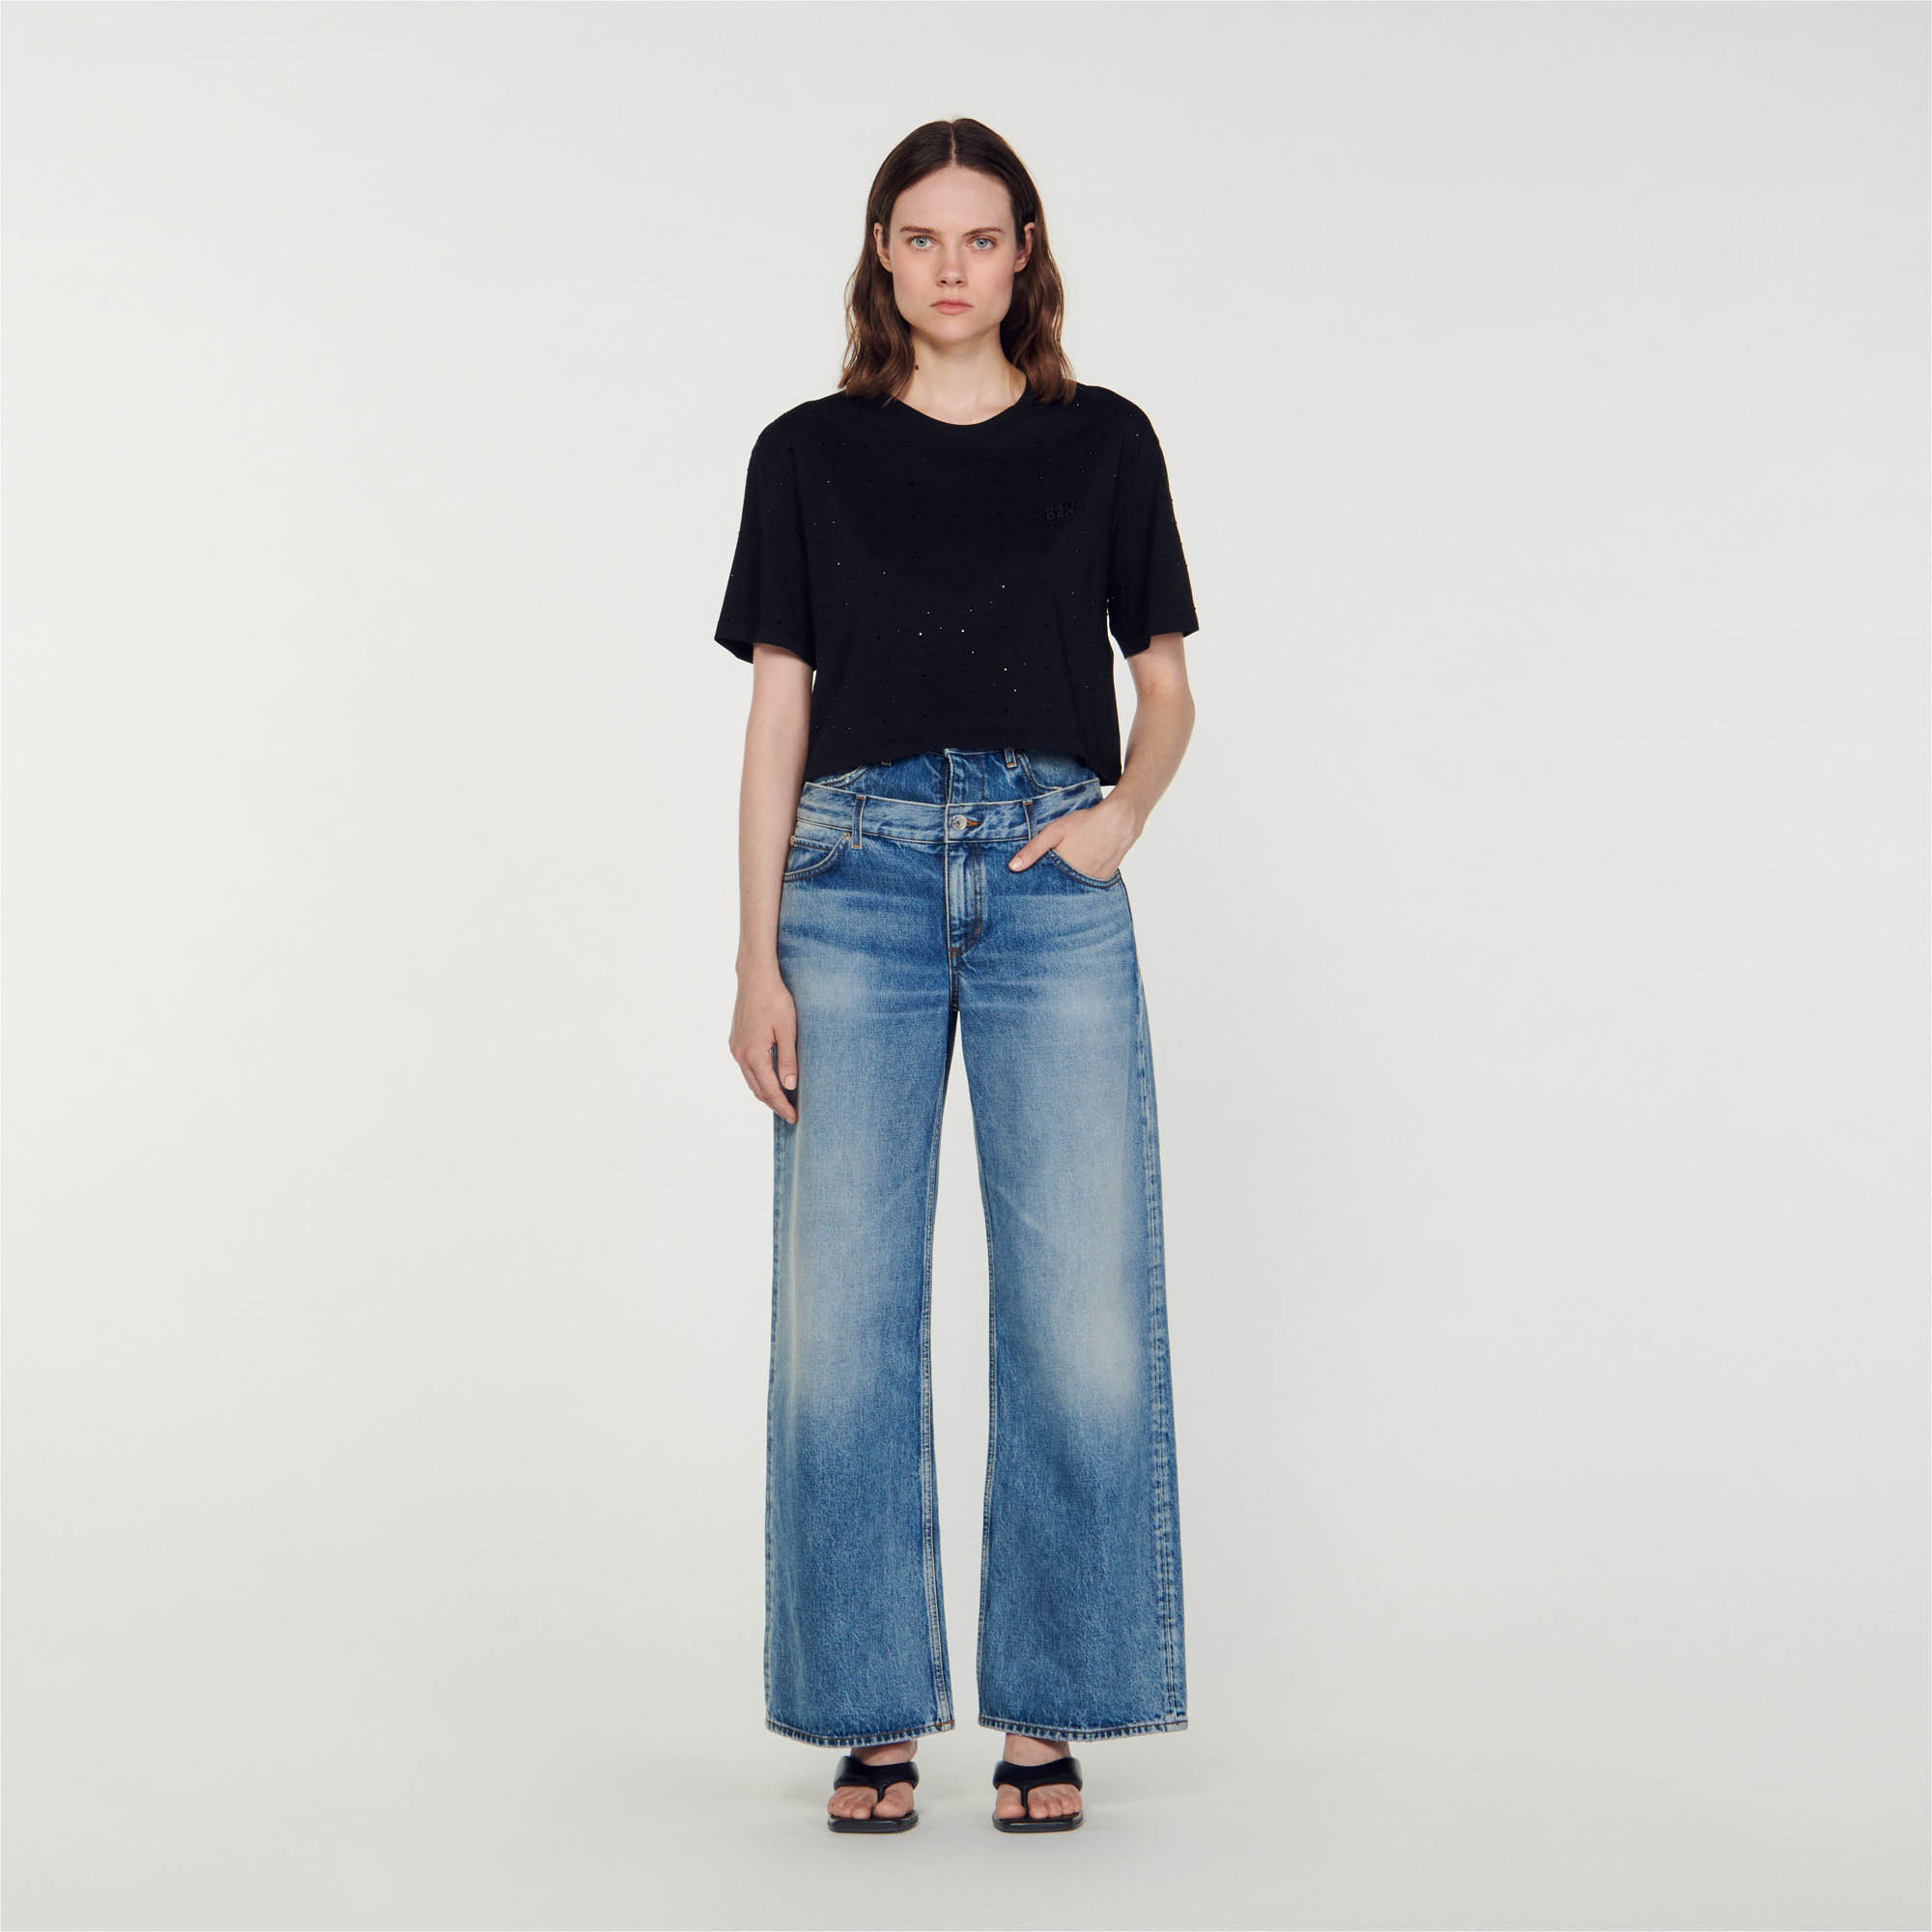 Sandro cotton Cropped T-shirt with rhinestones